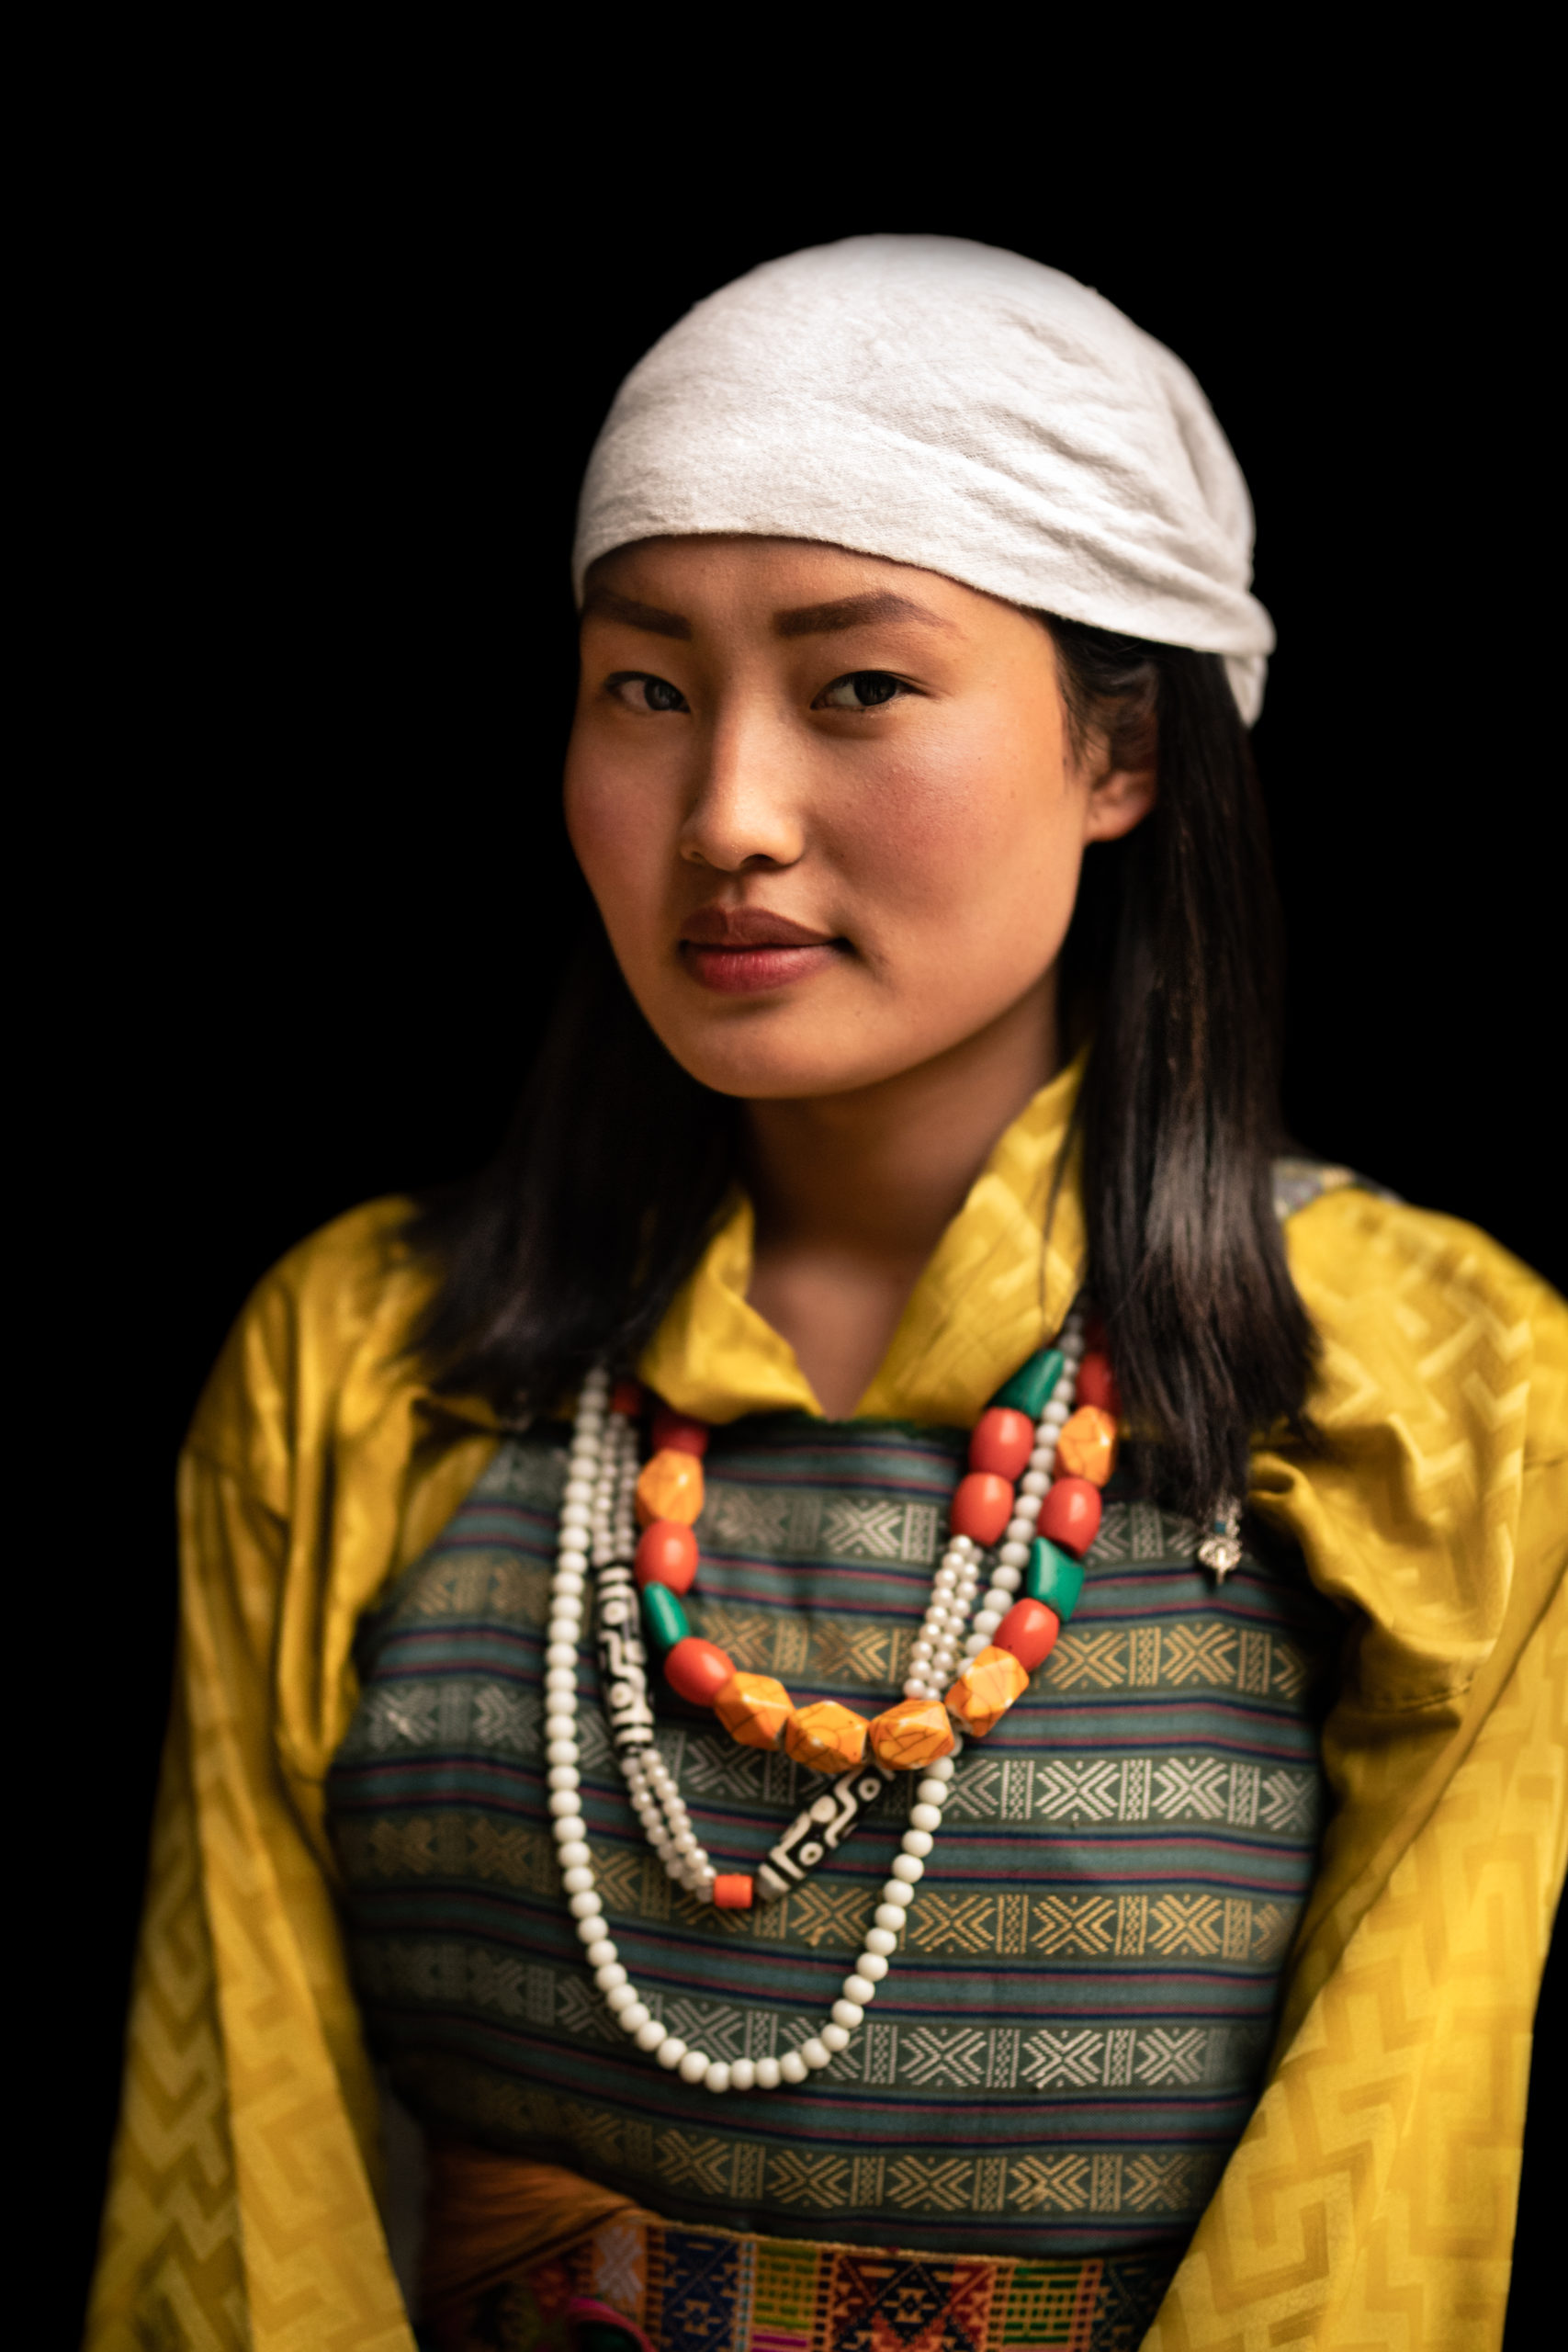 a young Bhutanese girl wears the traditional dance outfit of Bhutan